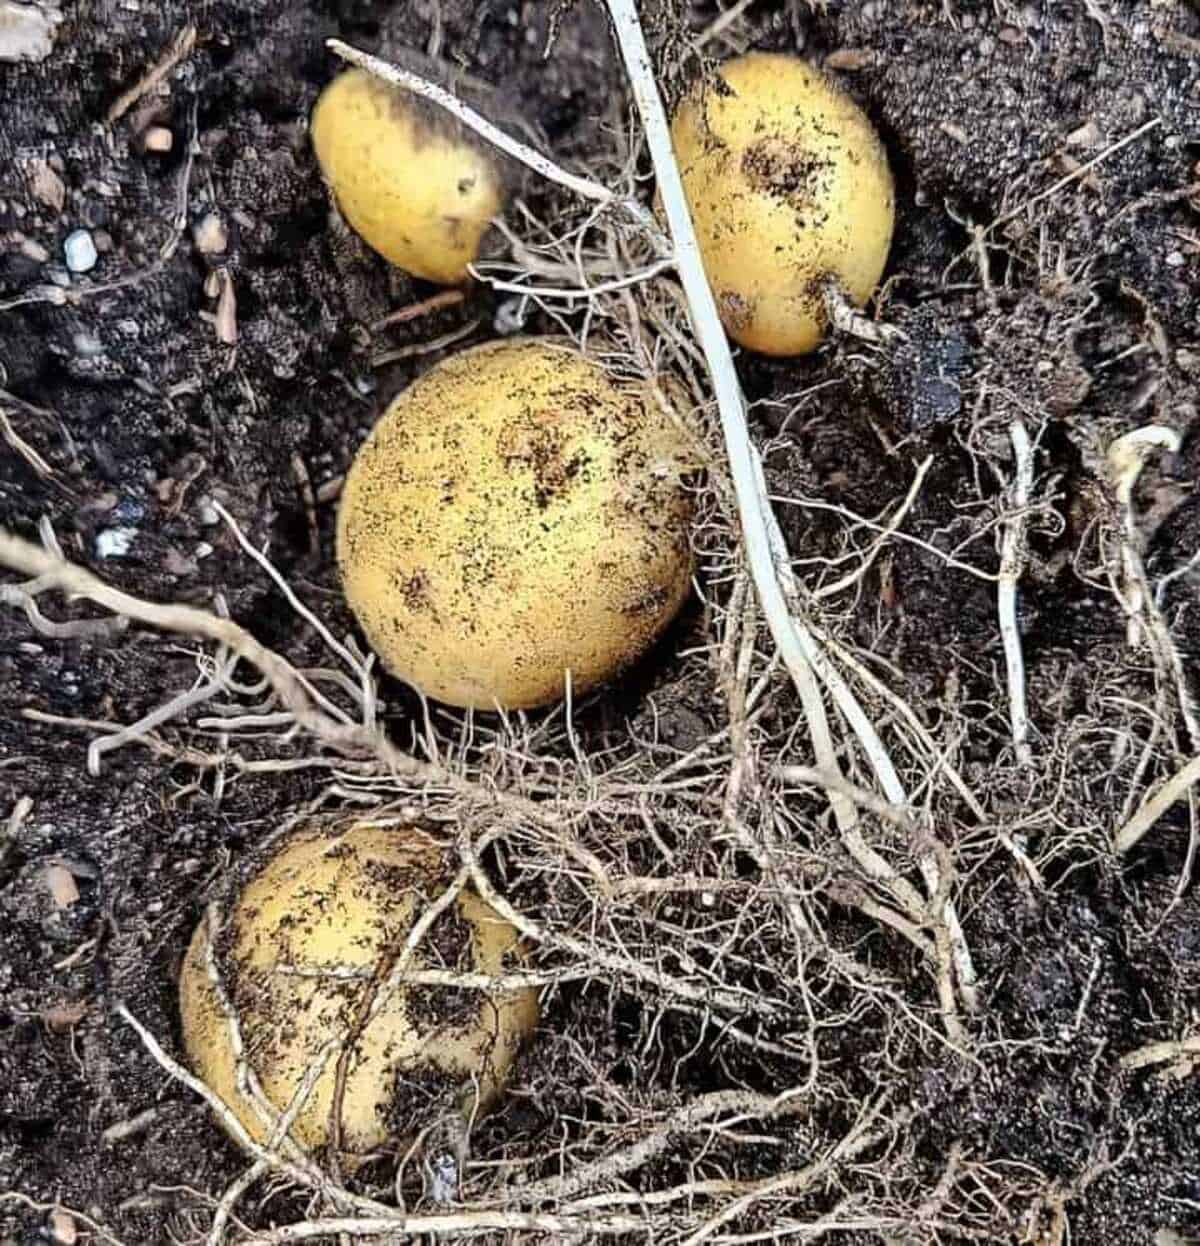 potatoes in dirt, with roots showing.